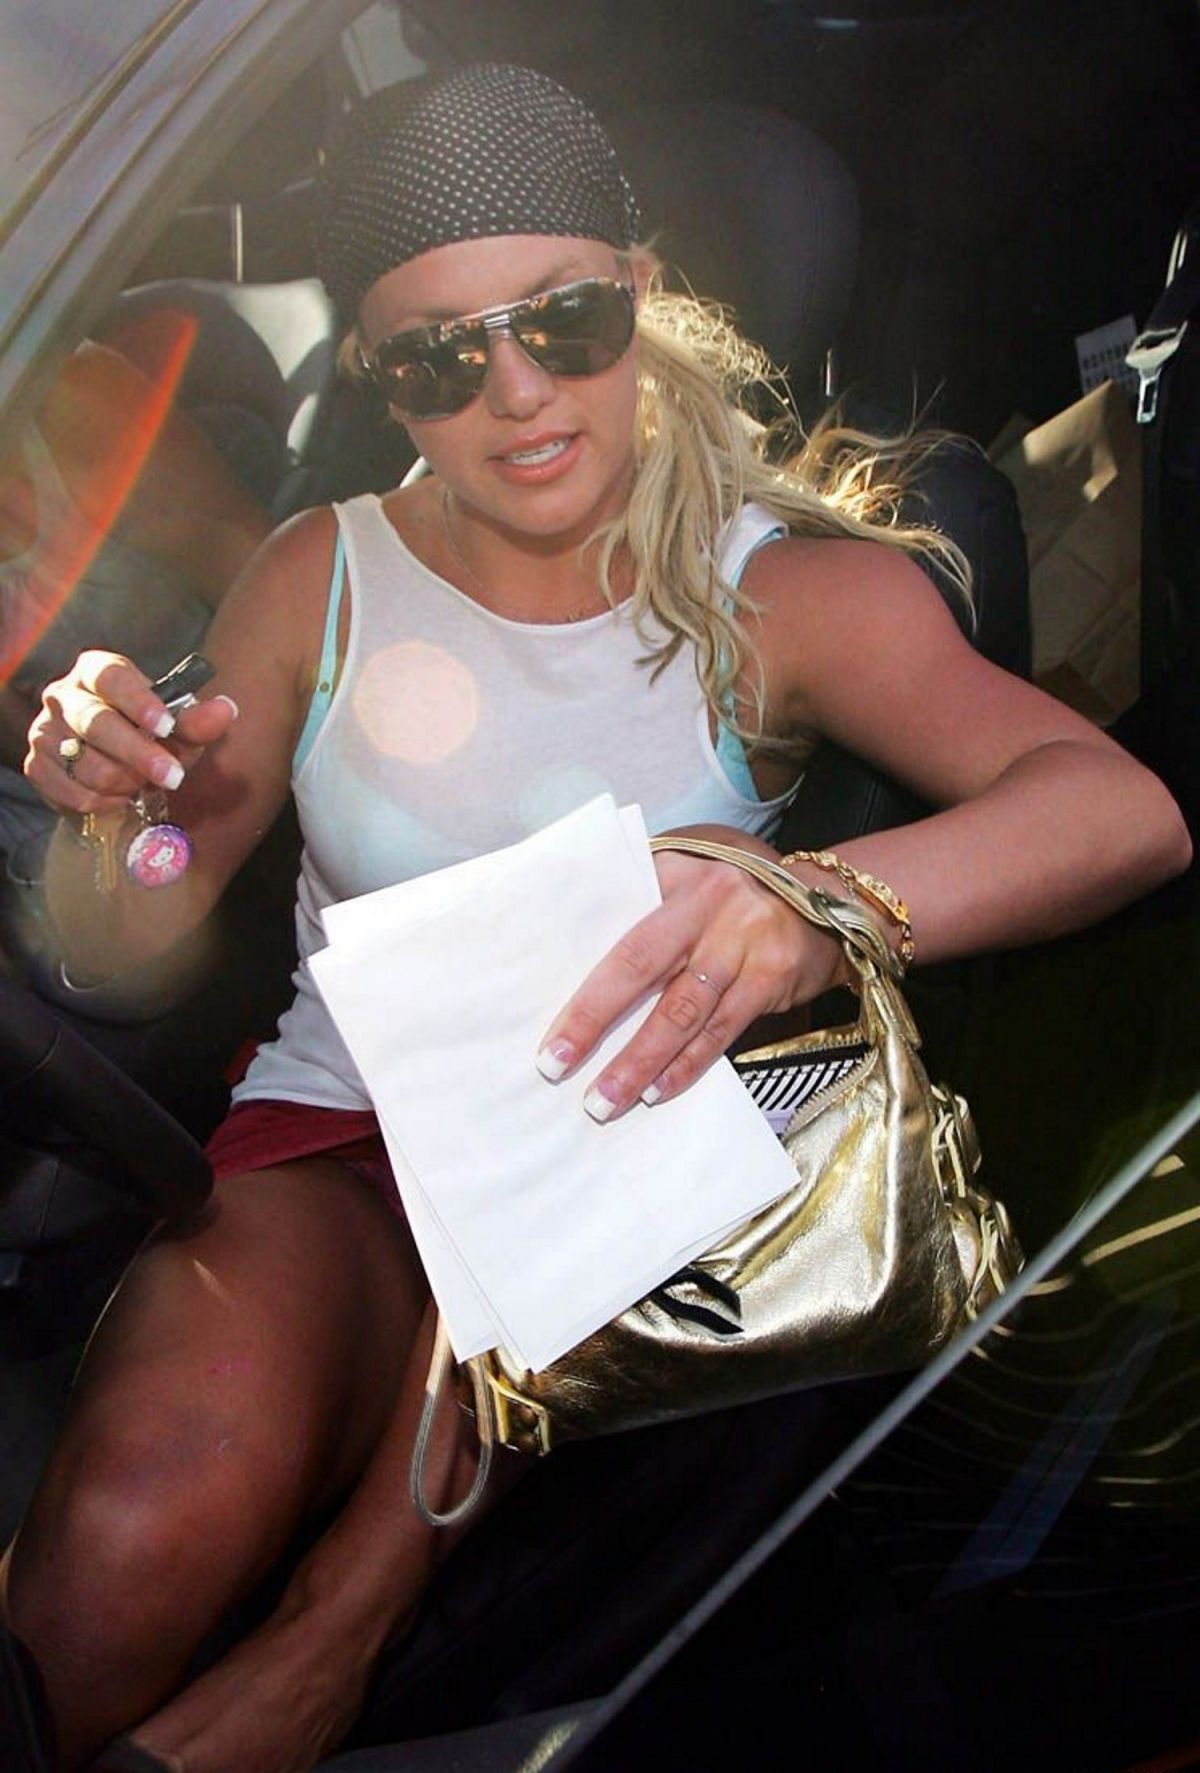 Britney Spears Getting Out Of Limo Pic